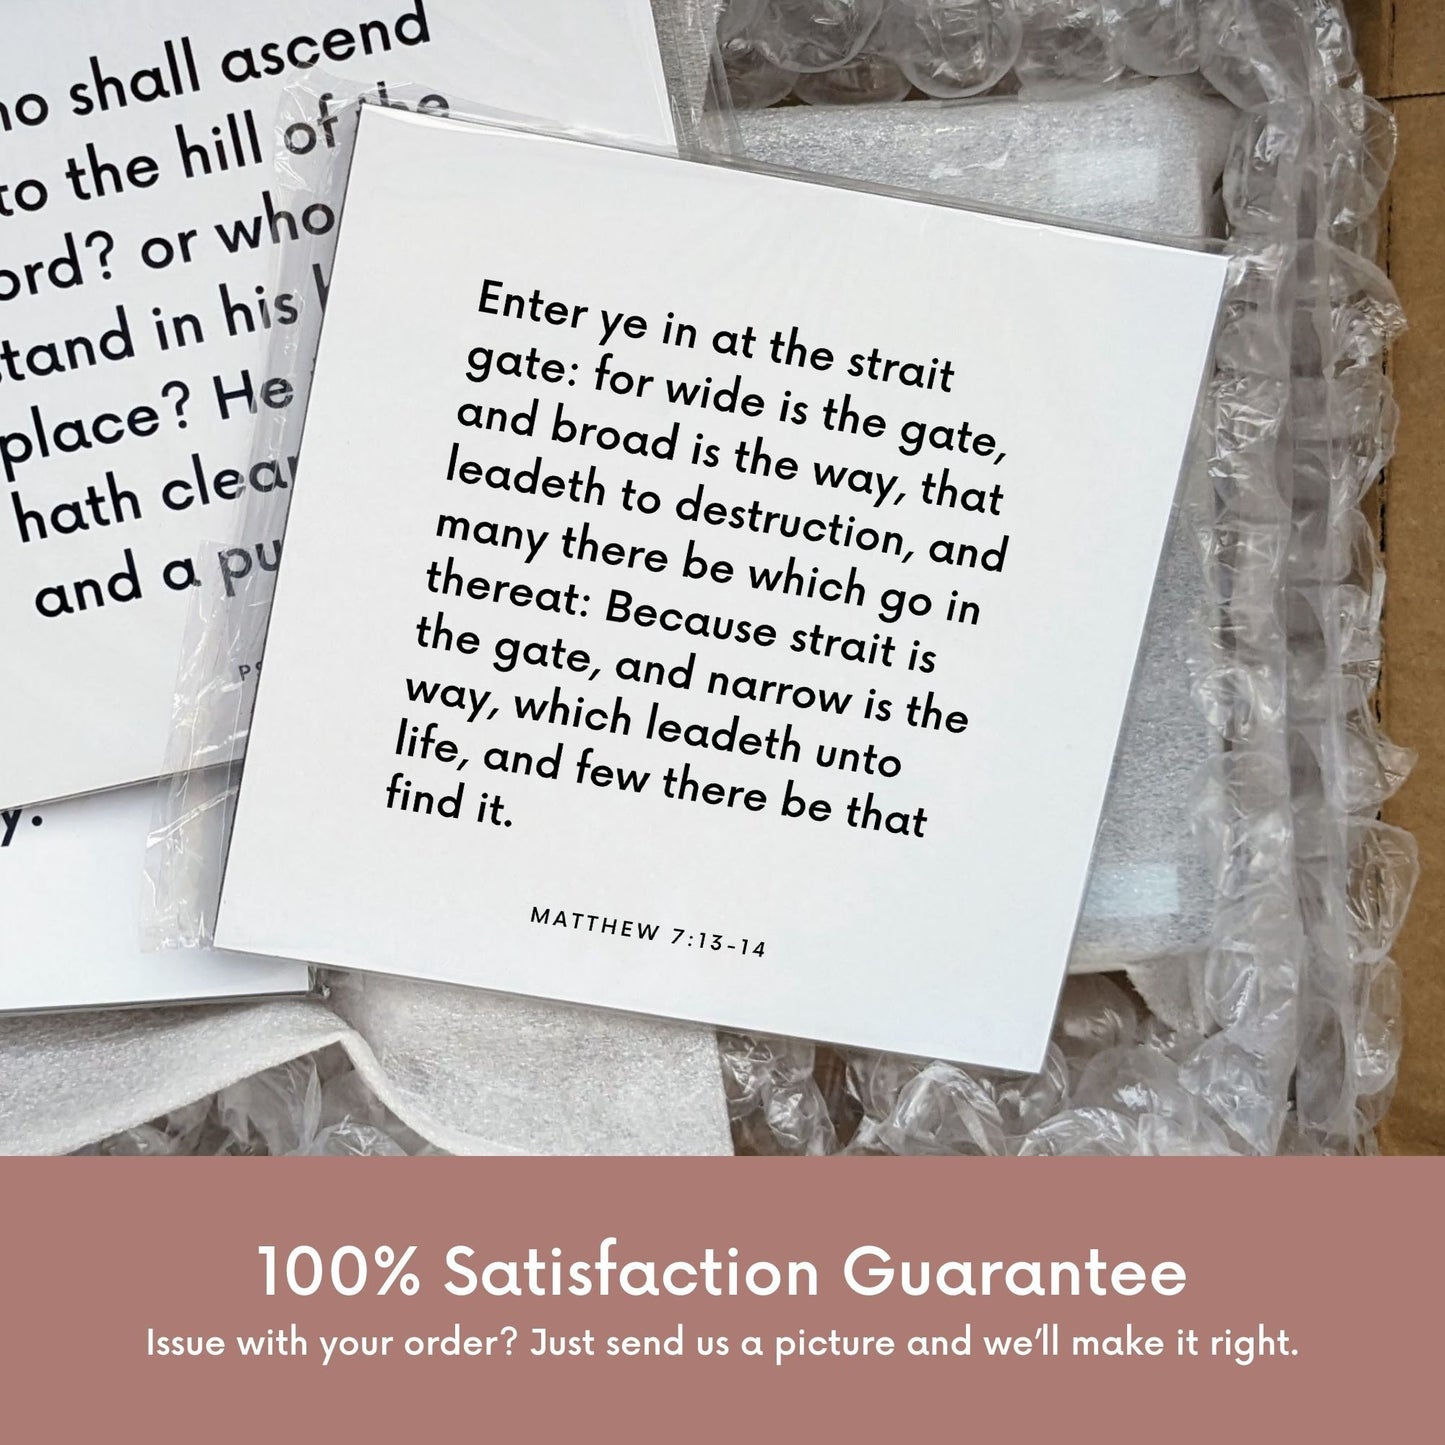 Shipping materials for scripture tile of Matthew 7:13-14 - "Strait is the gate, and narrow is the way"